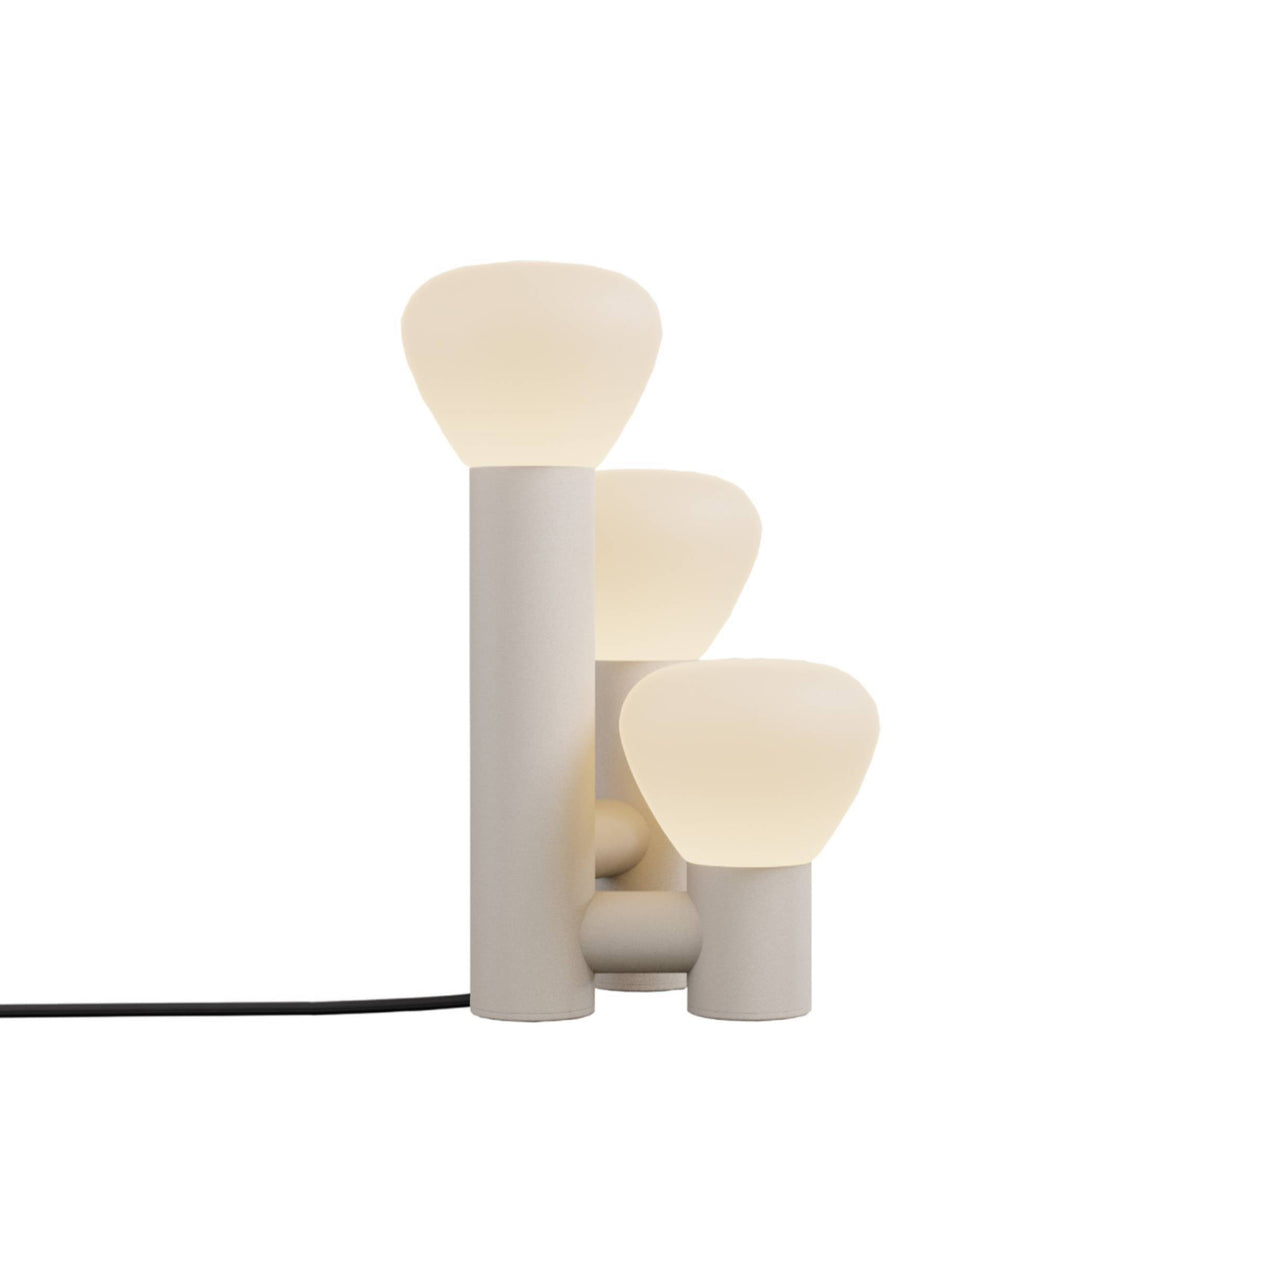 Parc 06 Table Lamp: Footswitch +  Beige + Black